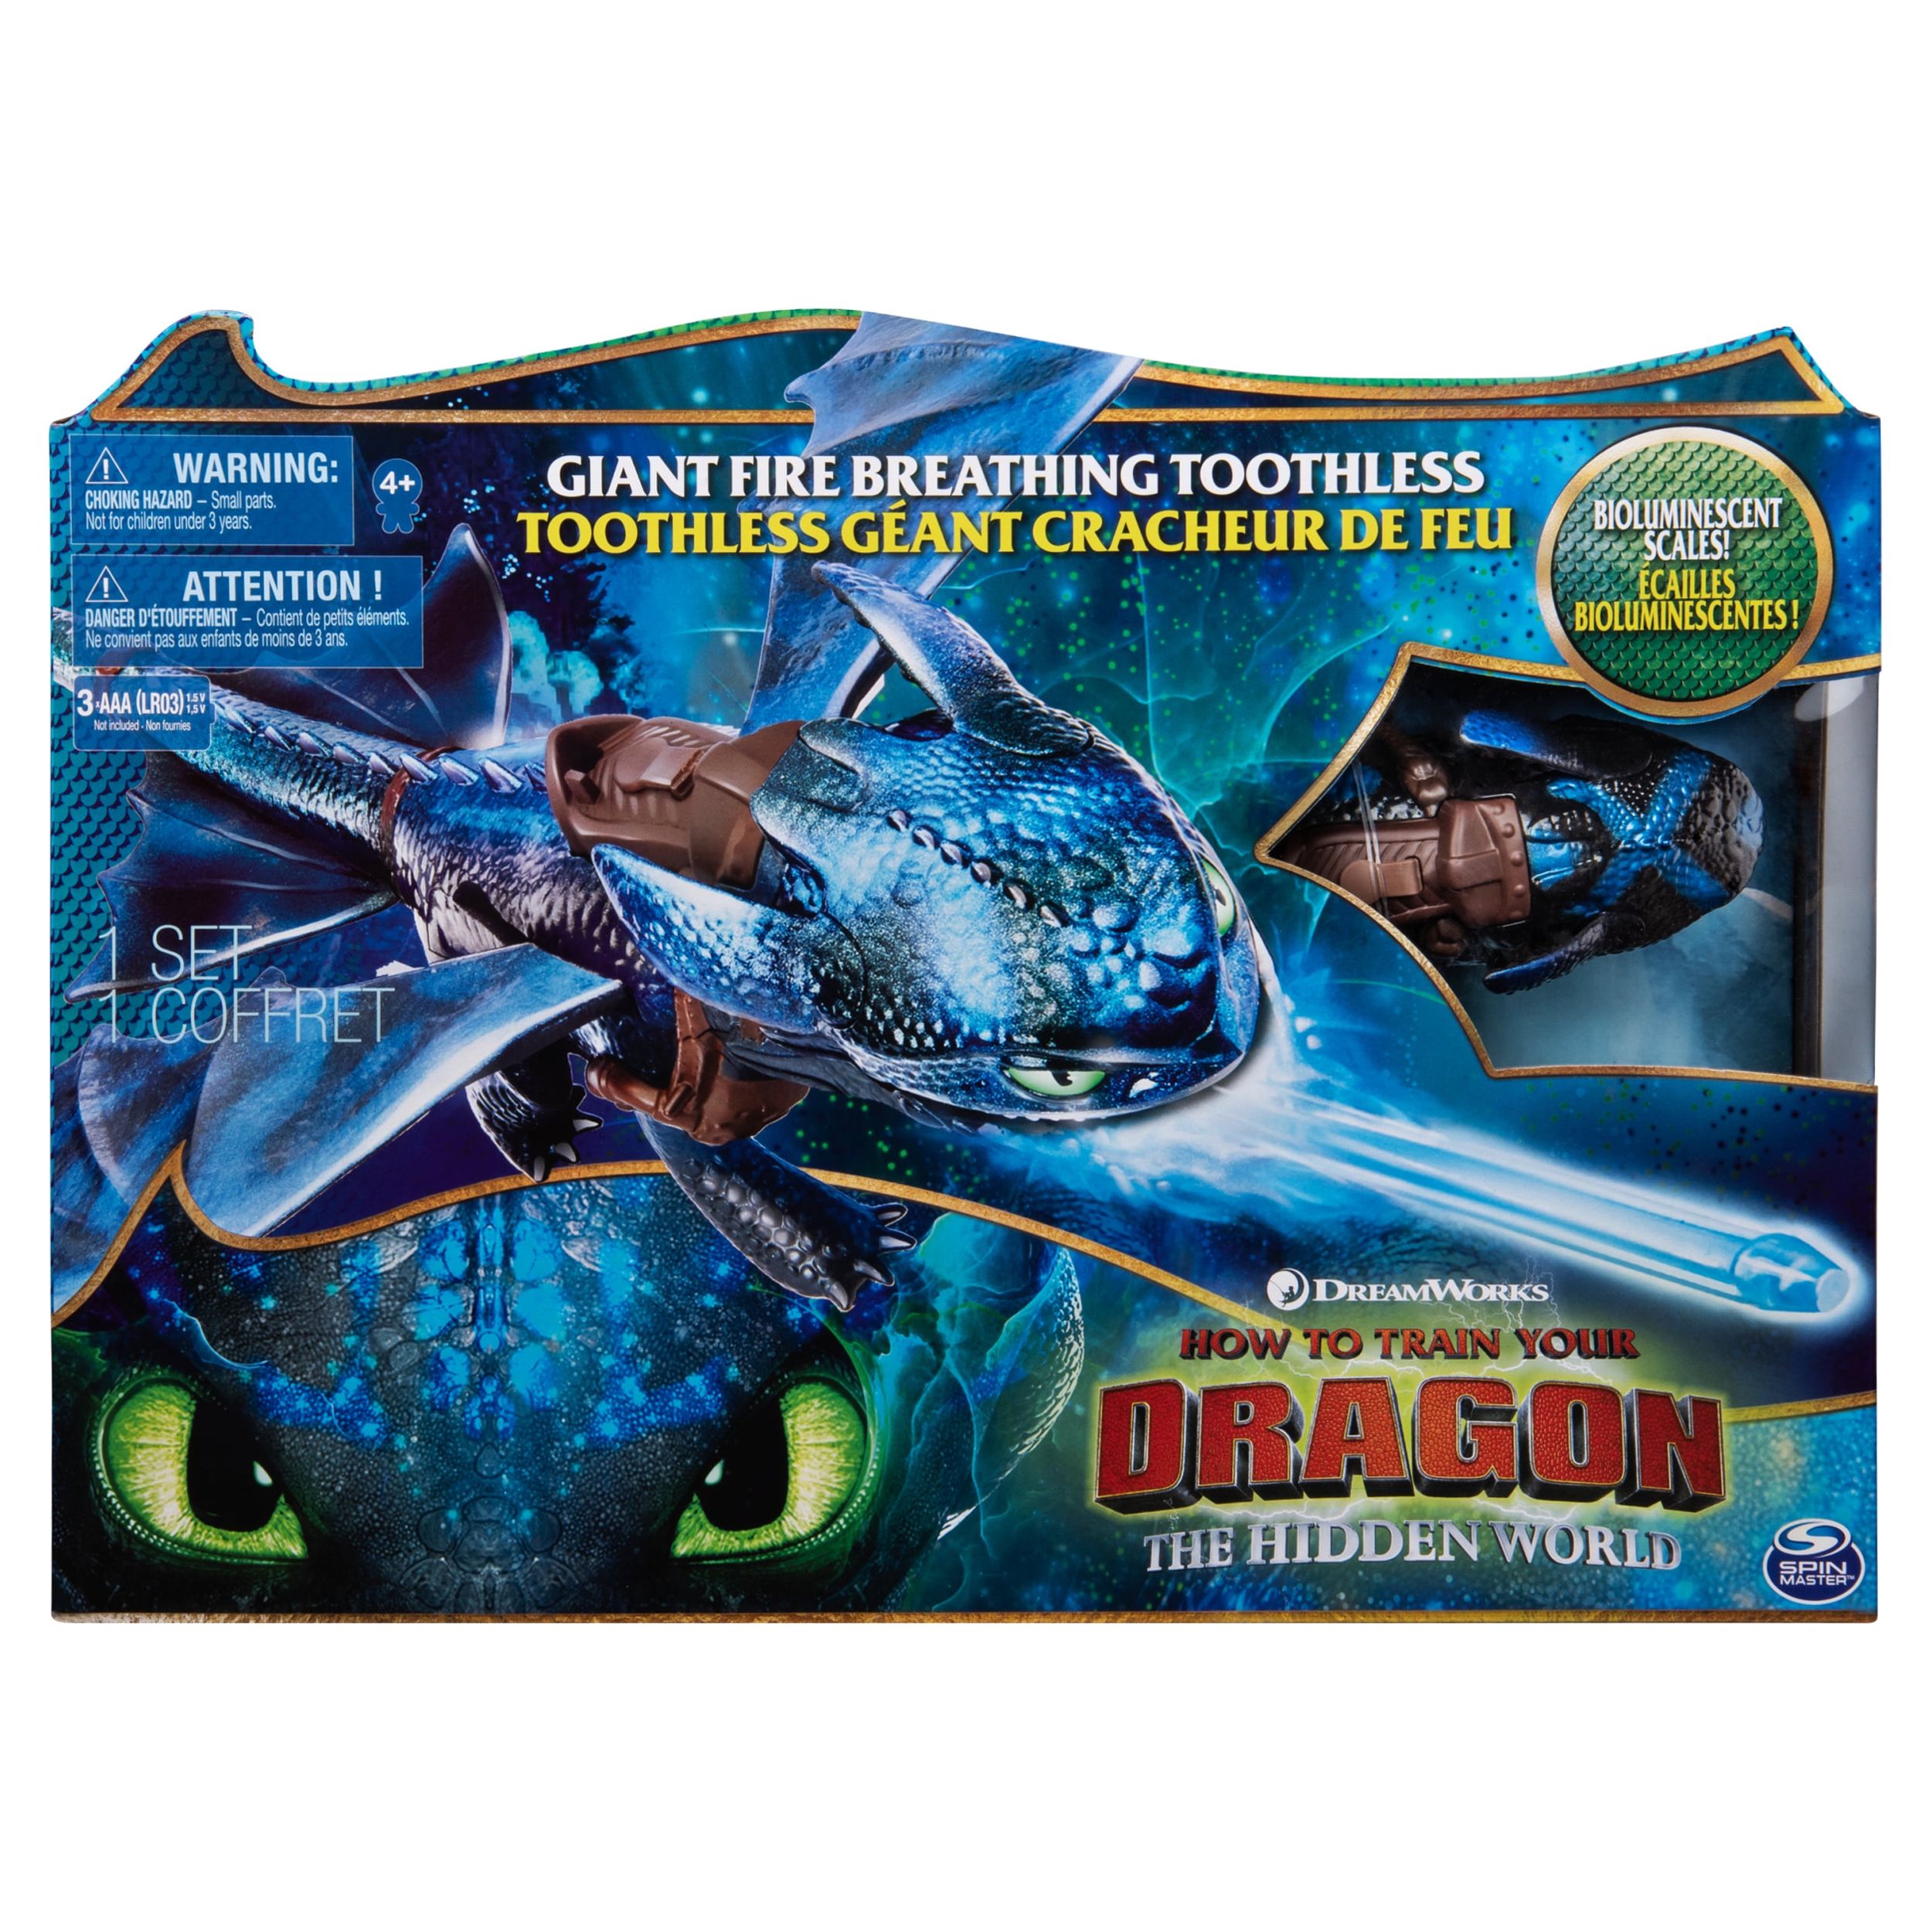 DreamWorks Dragons, Giant Fire Breathing Toothless Action Figure, 20-inch Dragon with Fire Breathing Effects - image 1 of 8